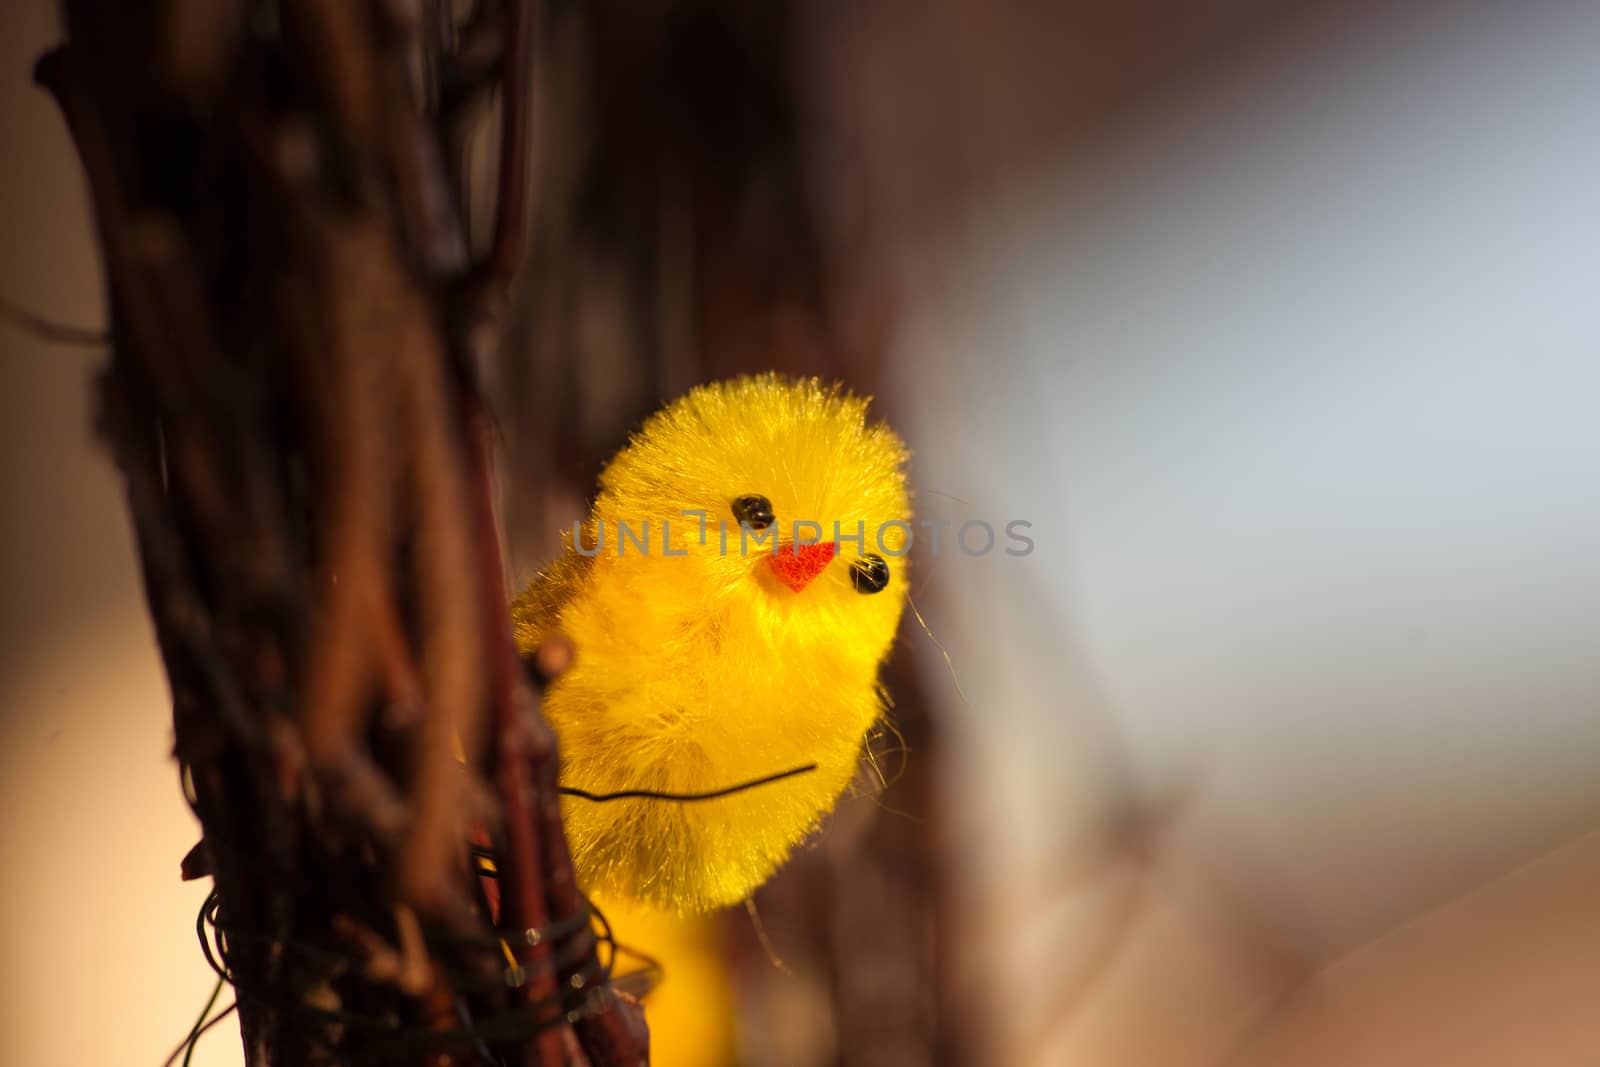 Handmade yellow easter chicken ornament by Sportactive